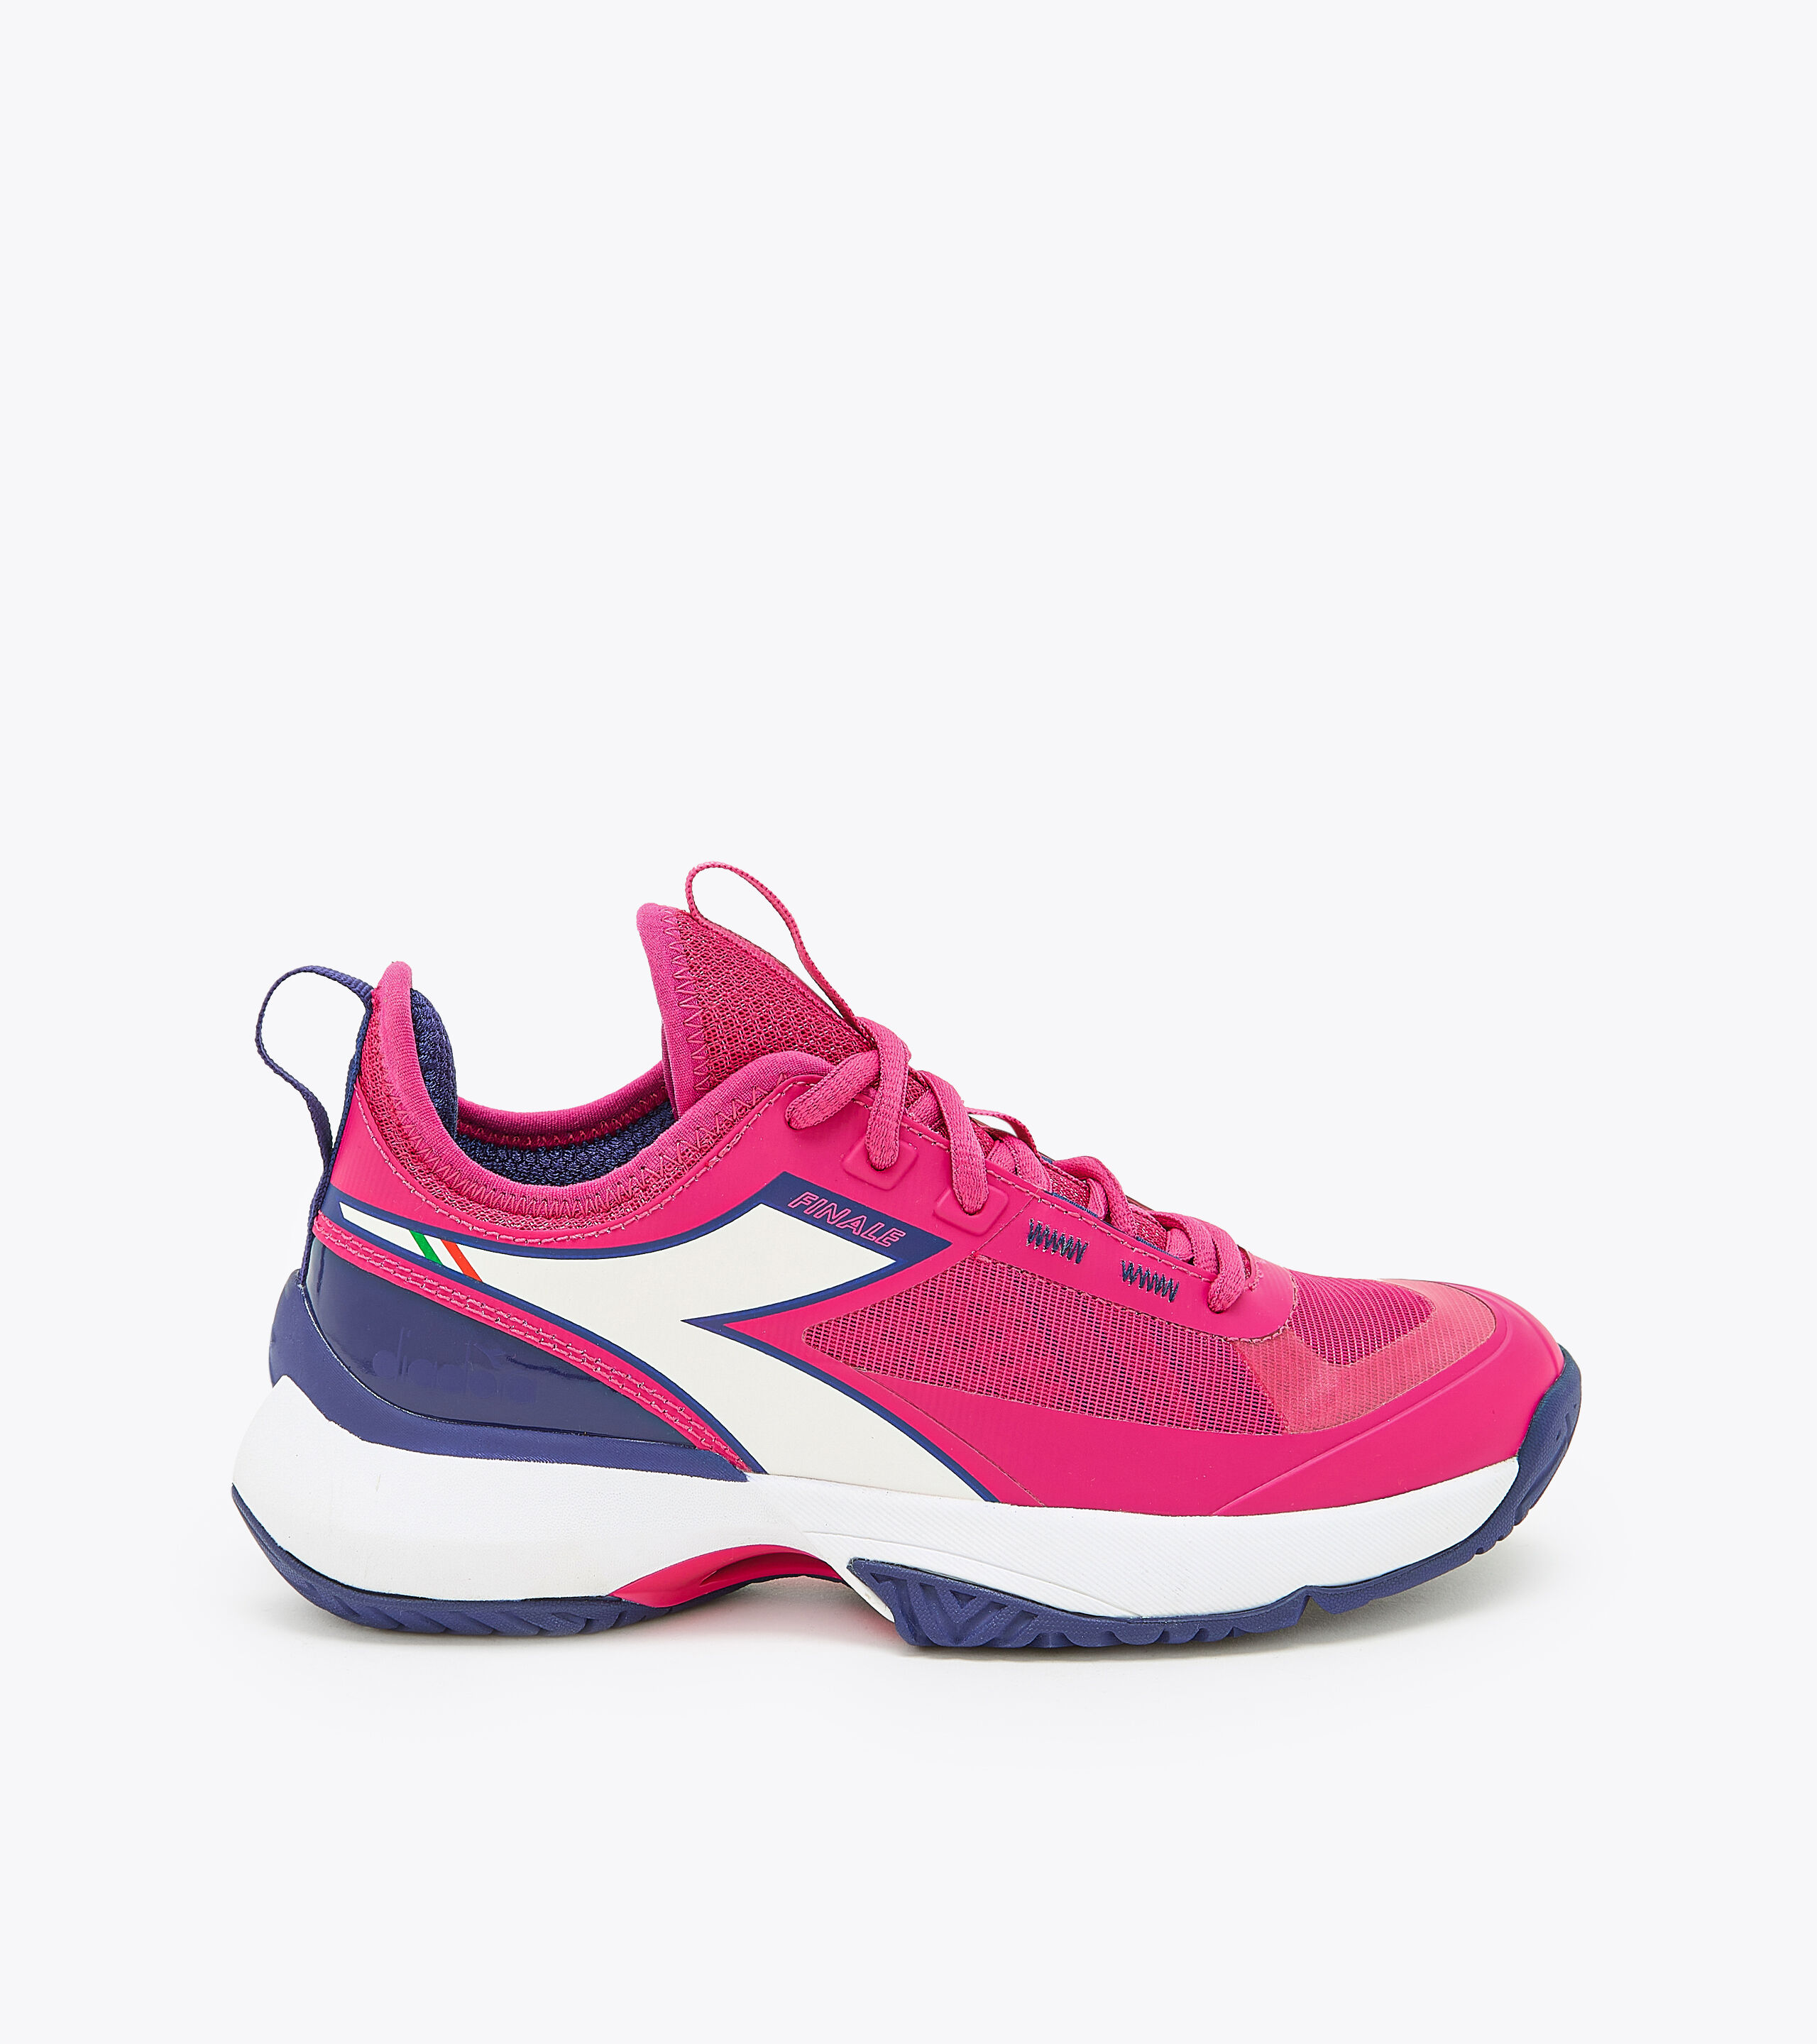 FINALE W AG Tennis shoes for hard surfaces or clay courts - Women